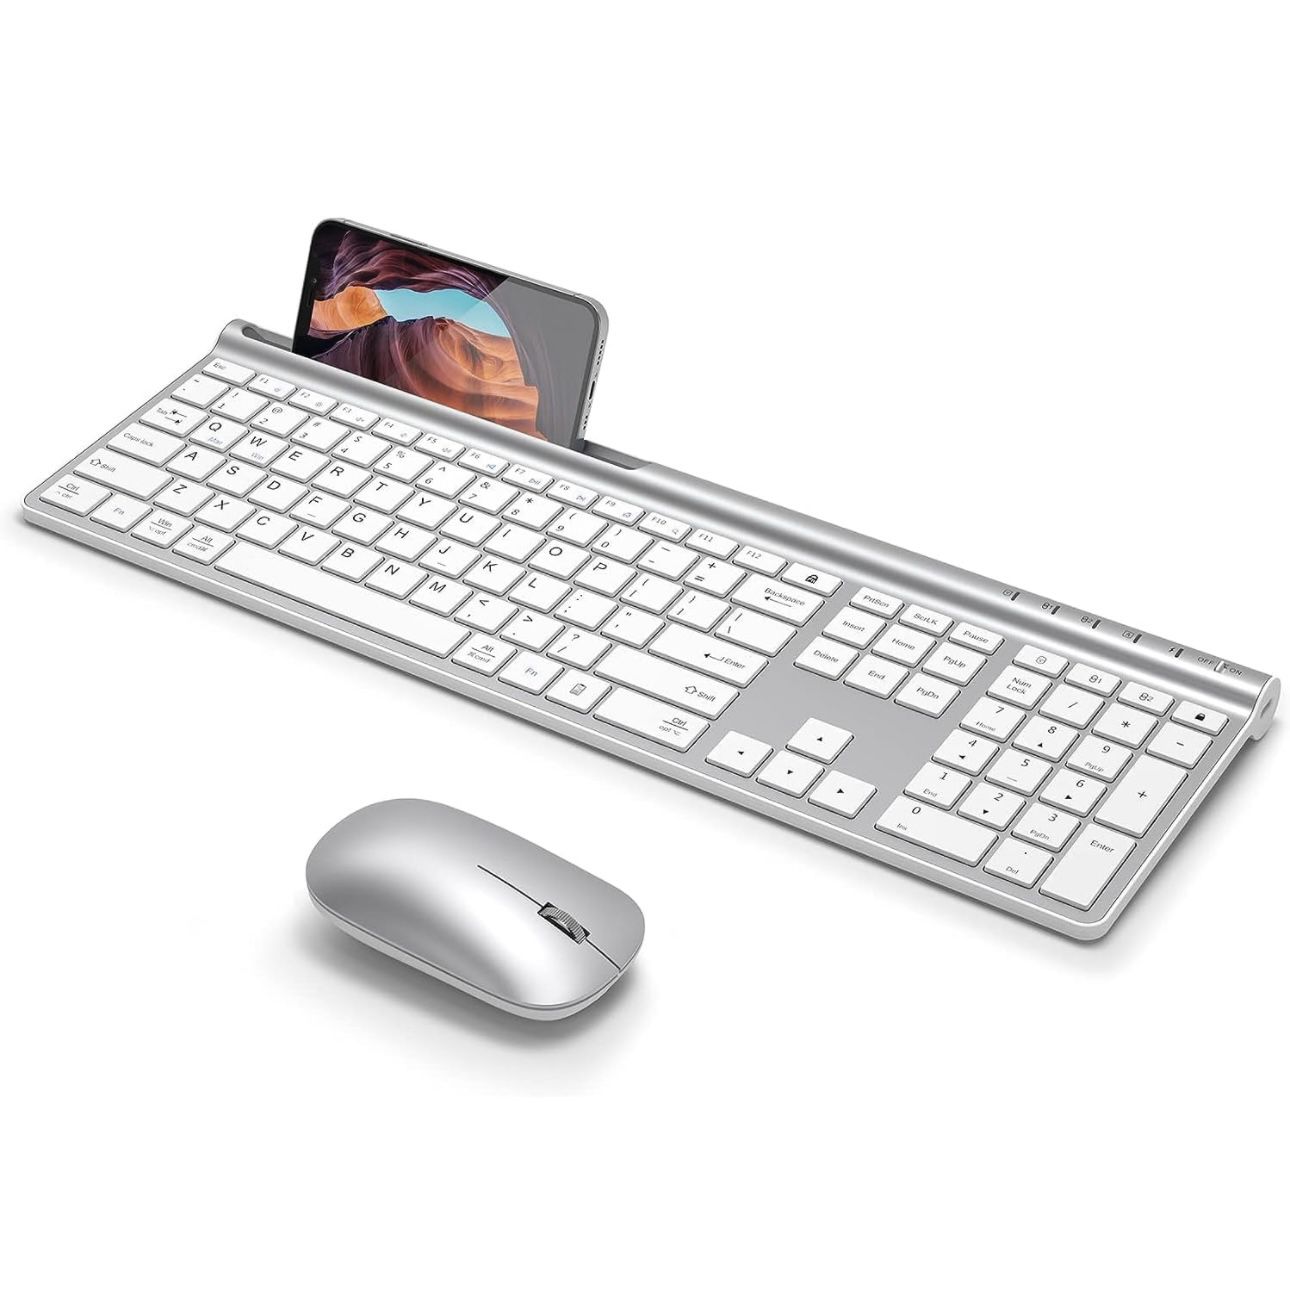 Wireless Mouse & Keyboard + adapters ($123 value)